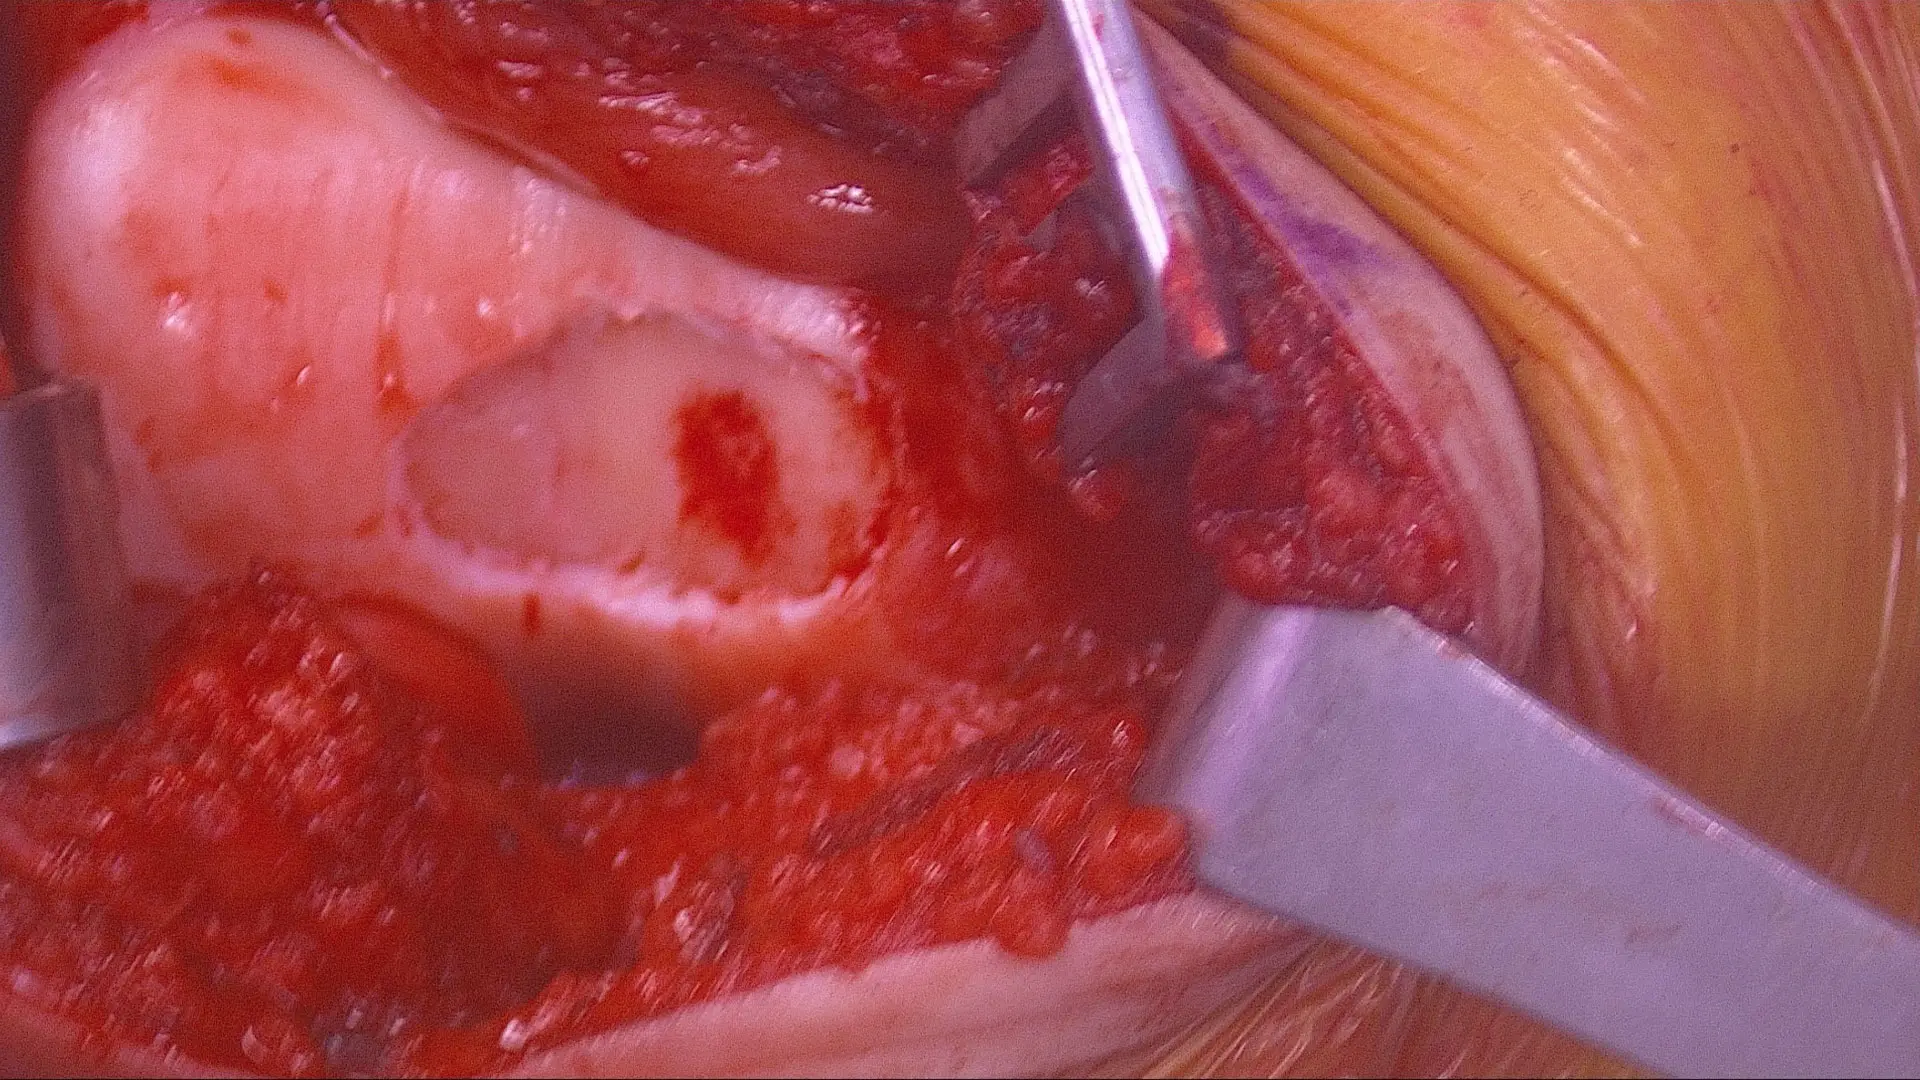 Preparation of the defect by removing all the damaged cartilage down to bone.